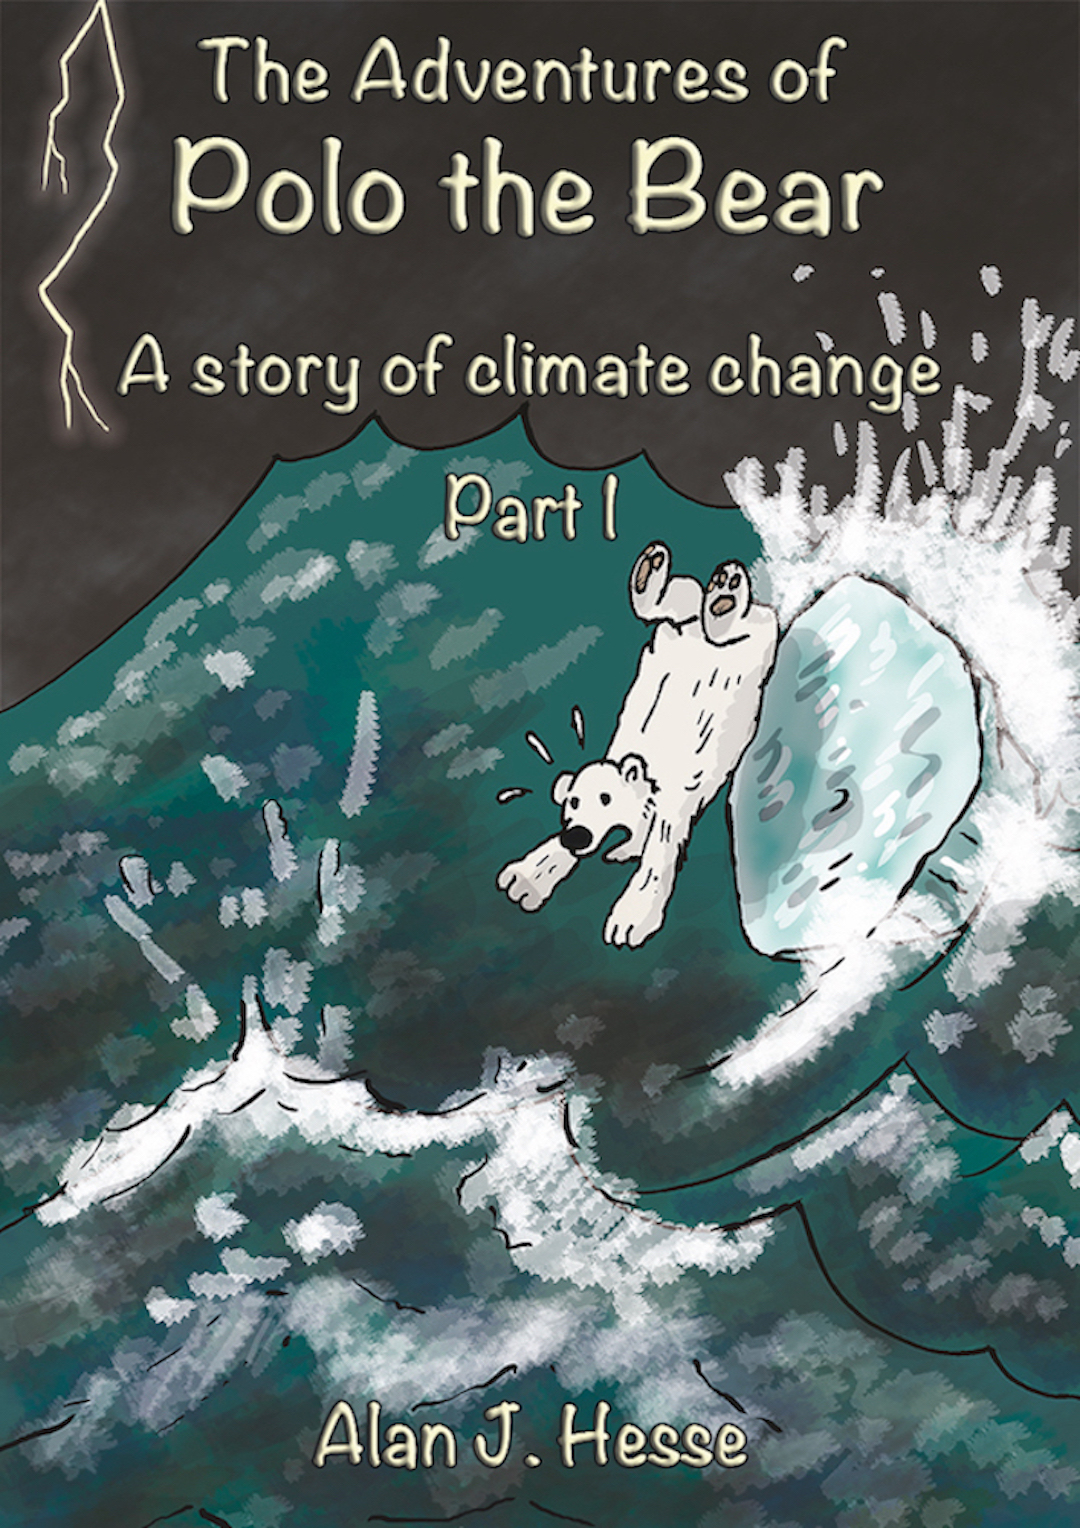 The Adventures of Polo the Bear: a story of climate change by Alan J. Hesse